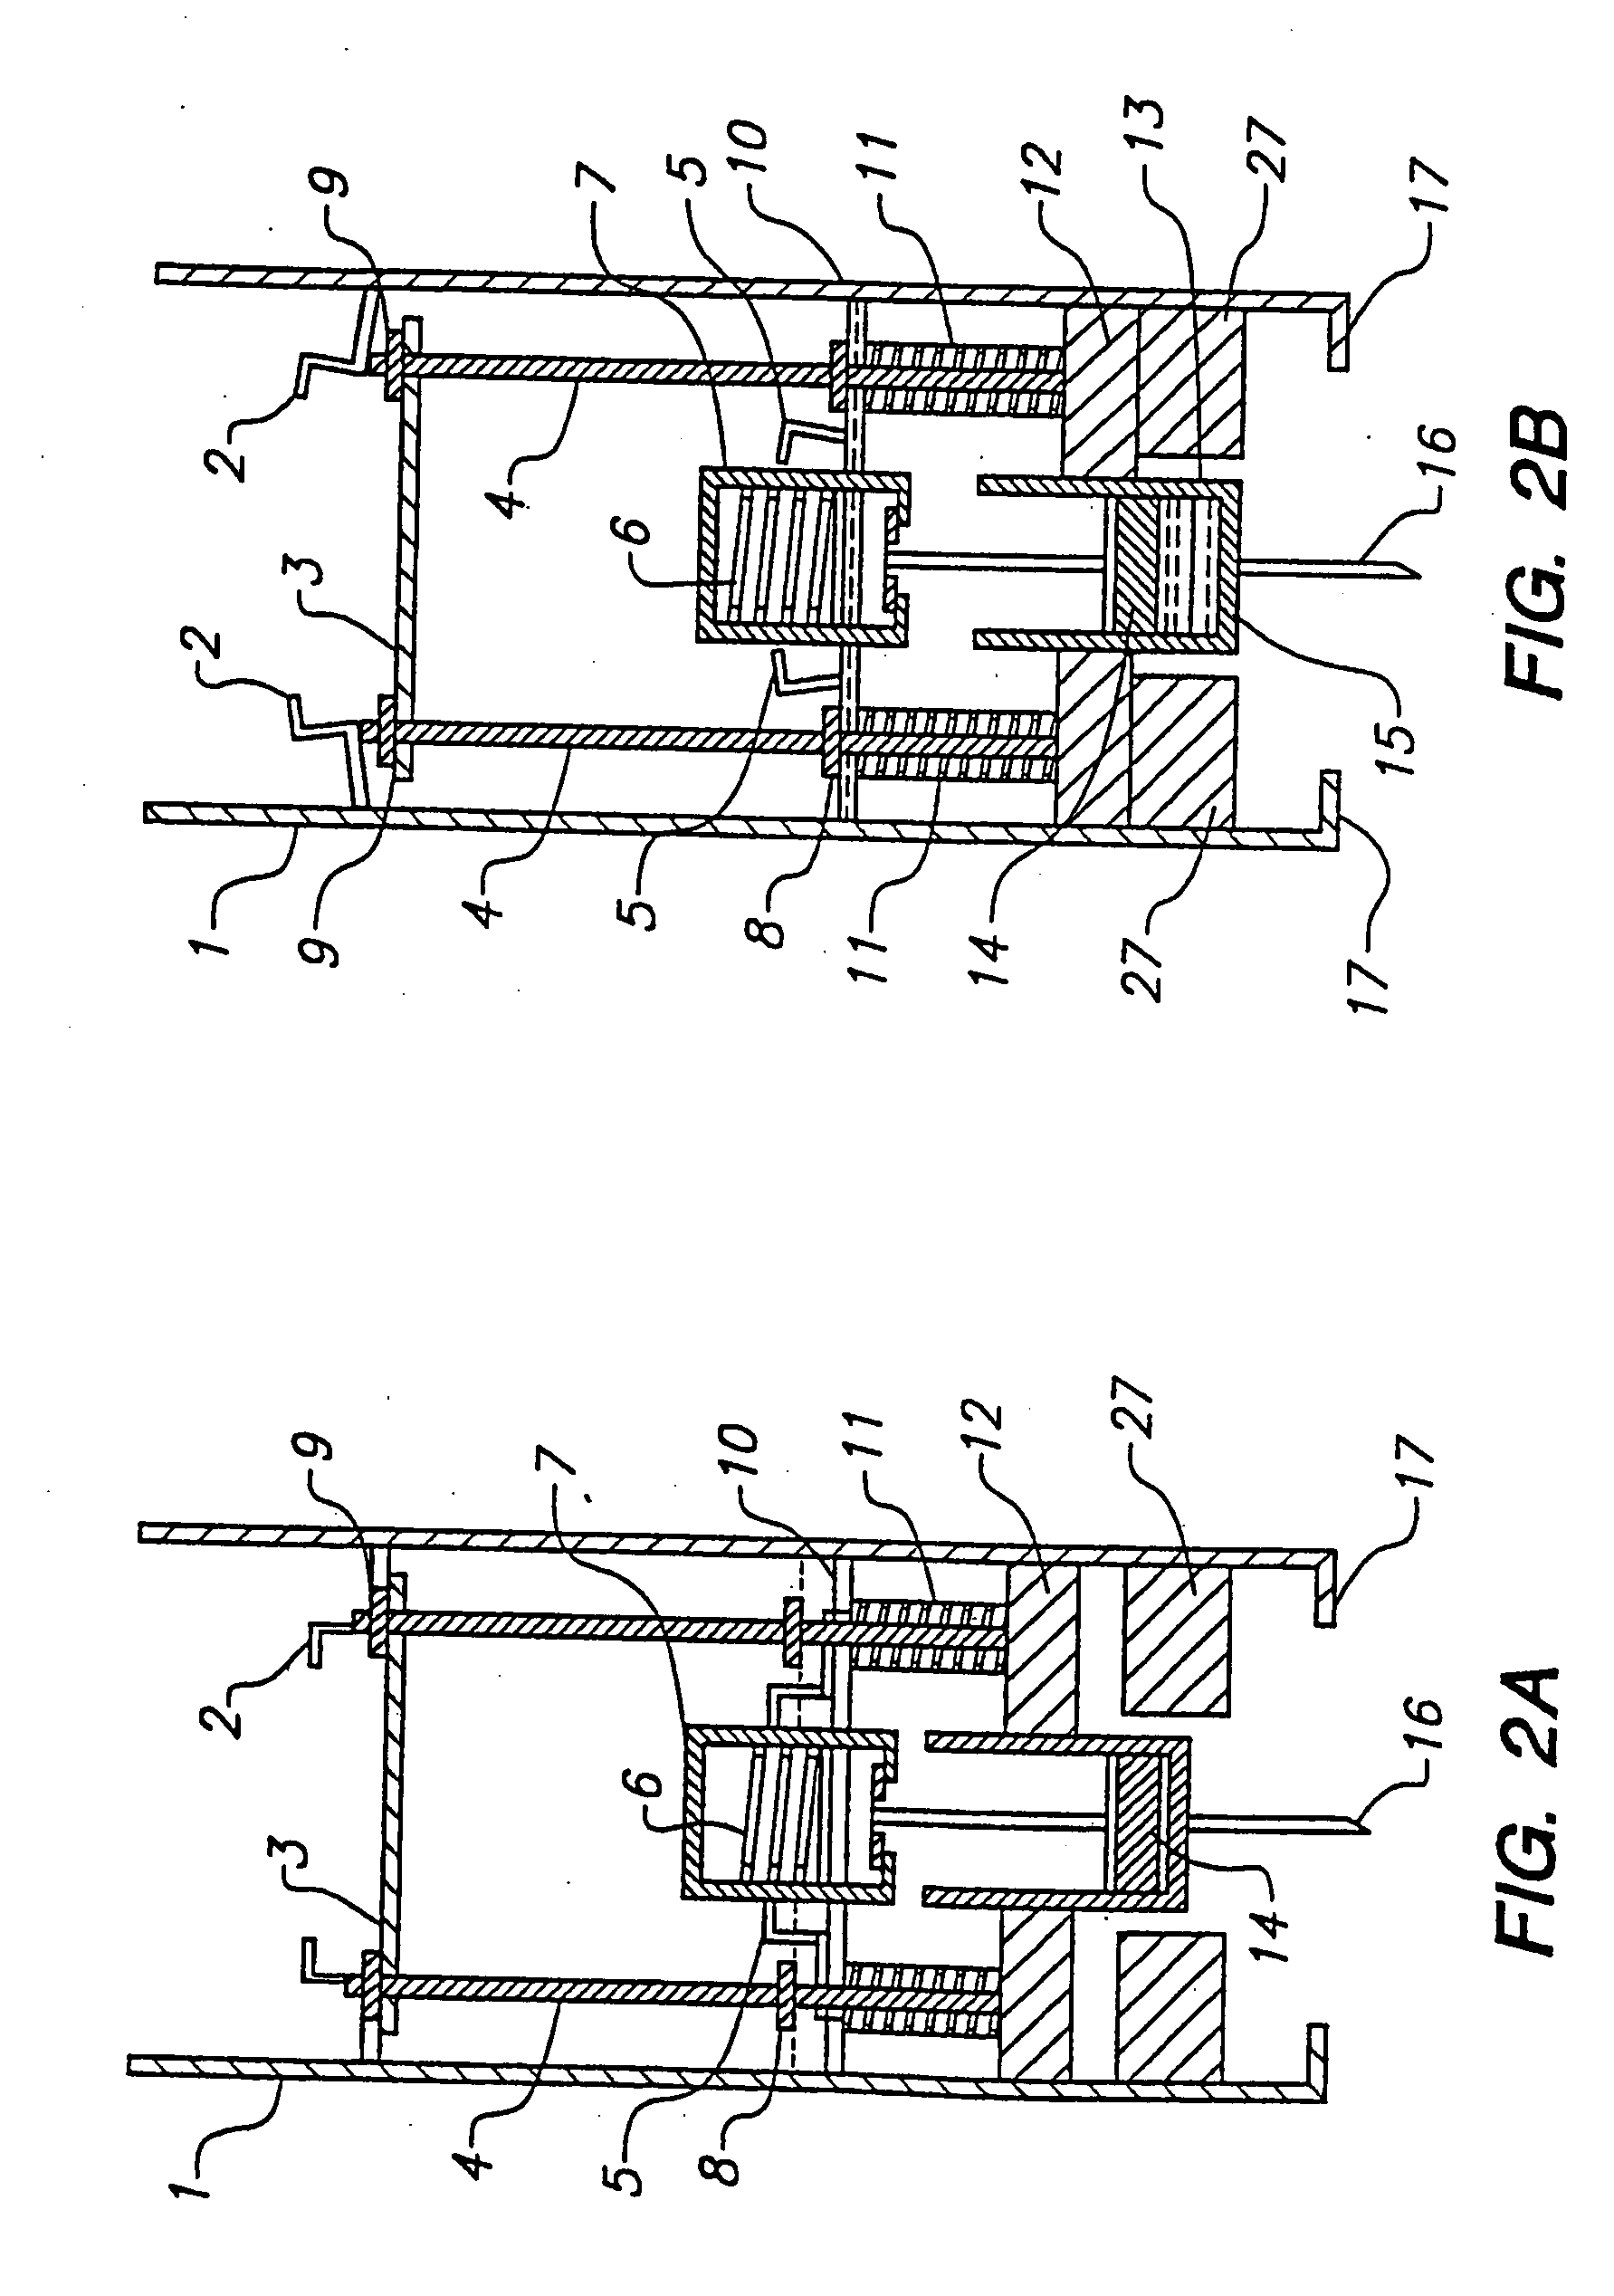 Blood and interstitial fluid sampling device